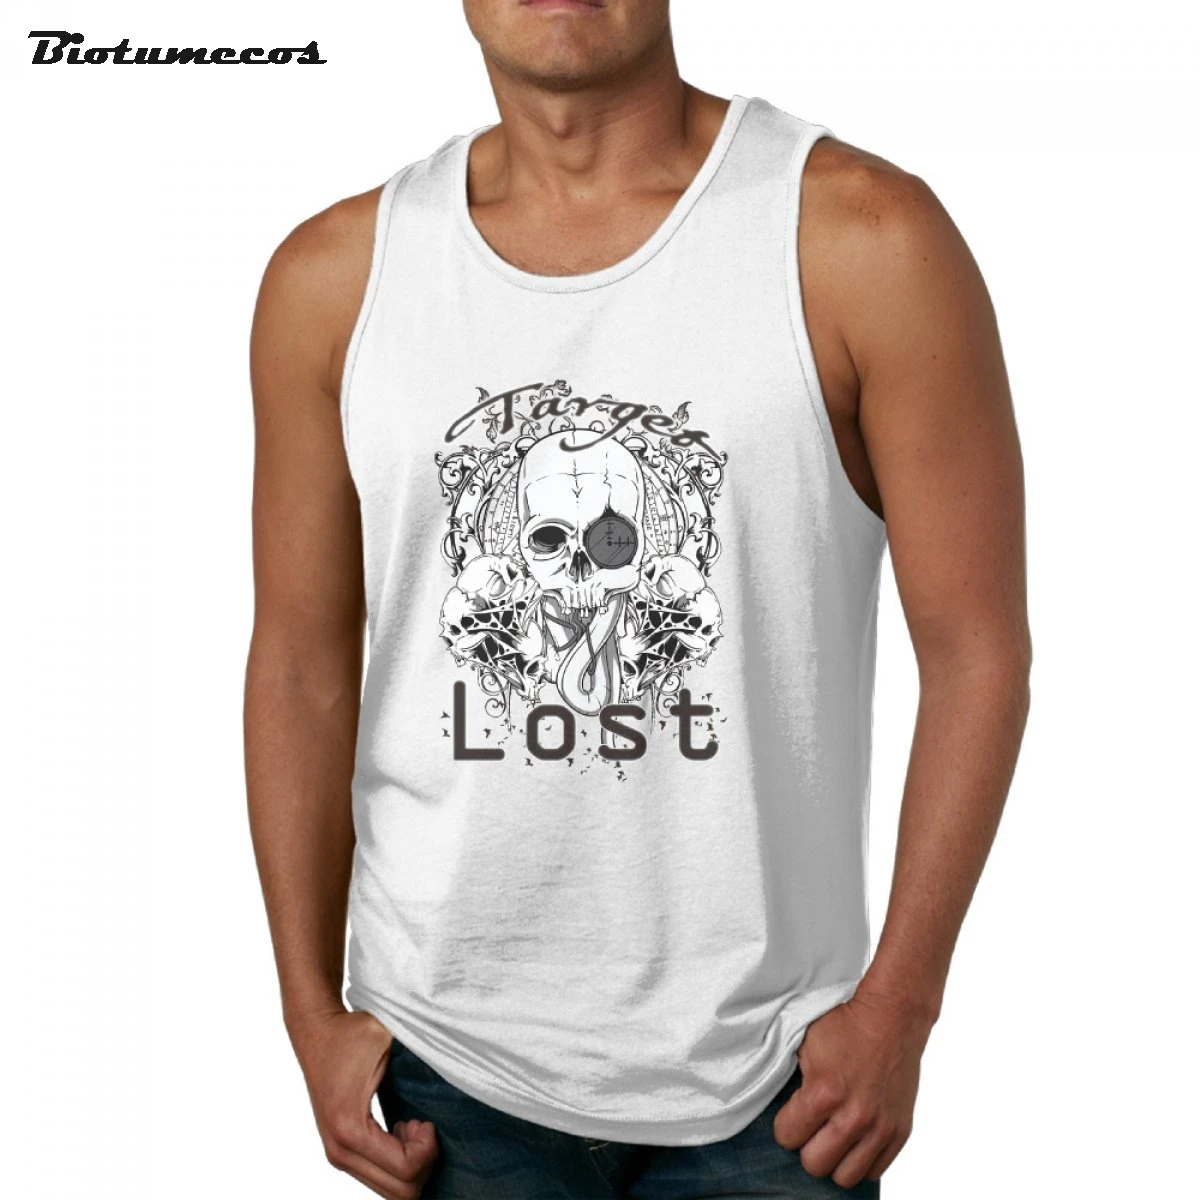 New Fashion Men Tank Tops Summer Target Lost Printed Male